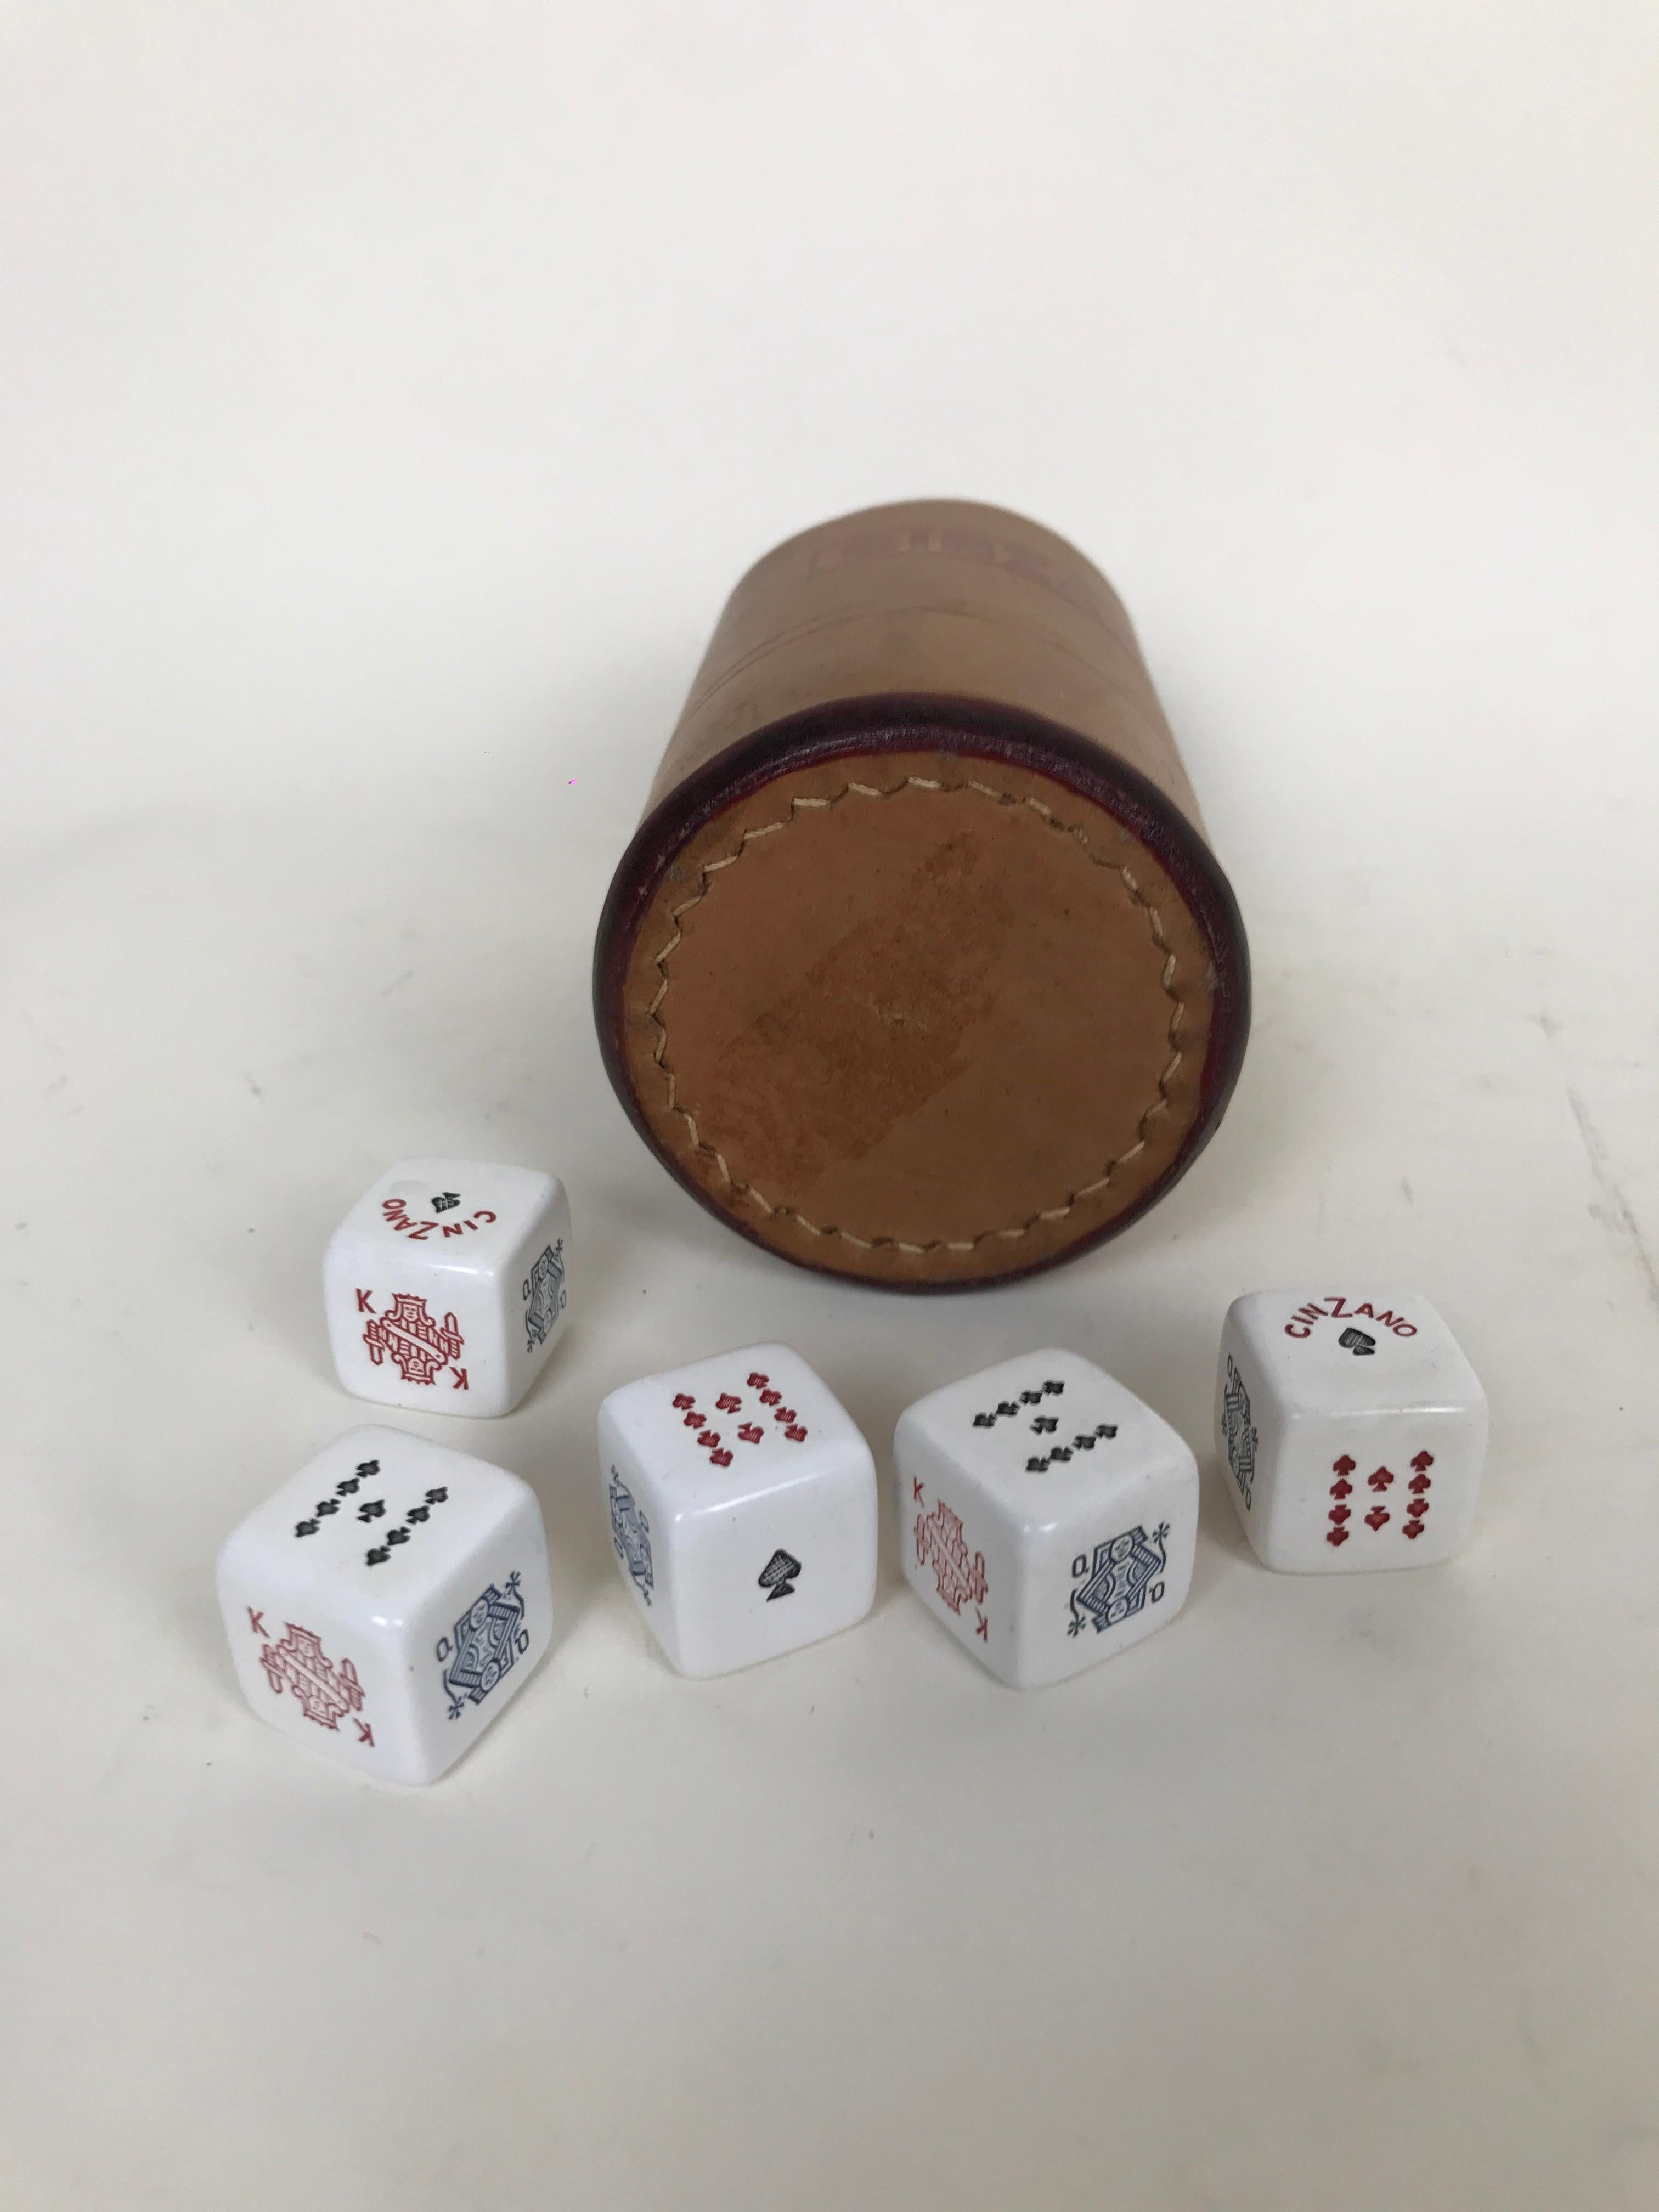 1970s Vintage Italian Cinzano Advertising Leather Dice Cup with Set of Dice For Sale 2